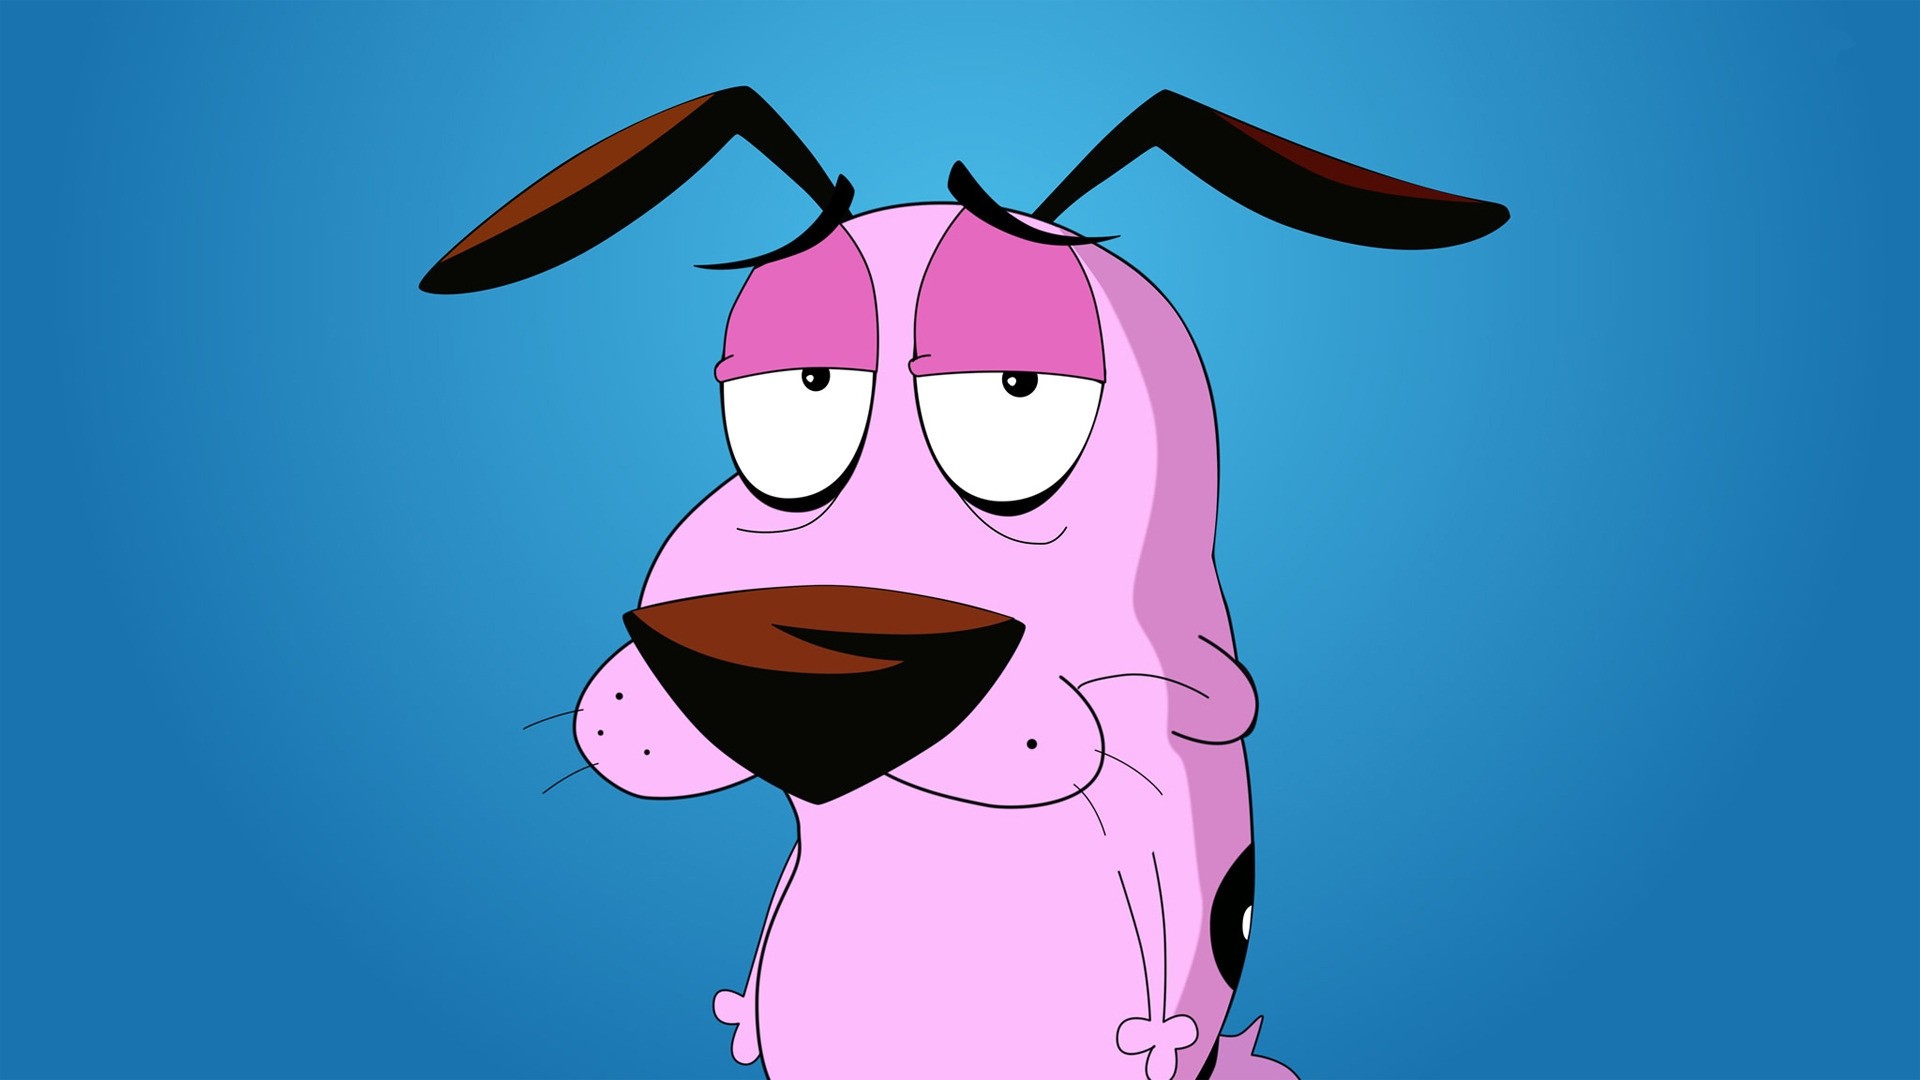 1920x1080 Courage The Cowardly Dog Full HD Wallpaper.